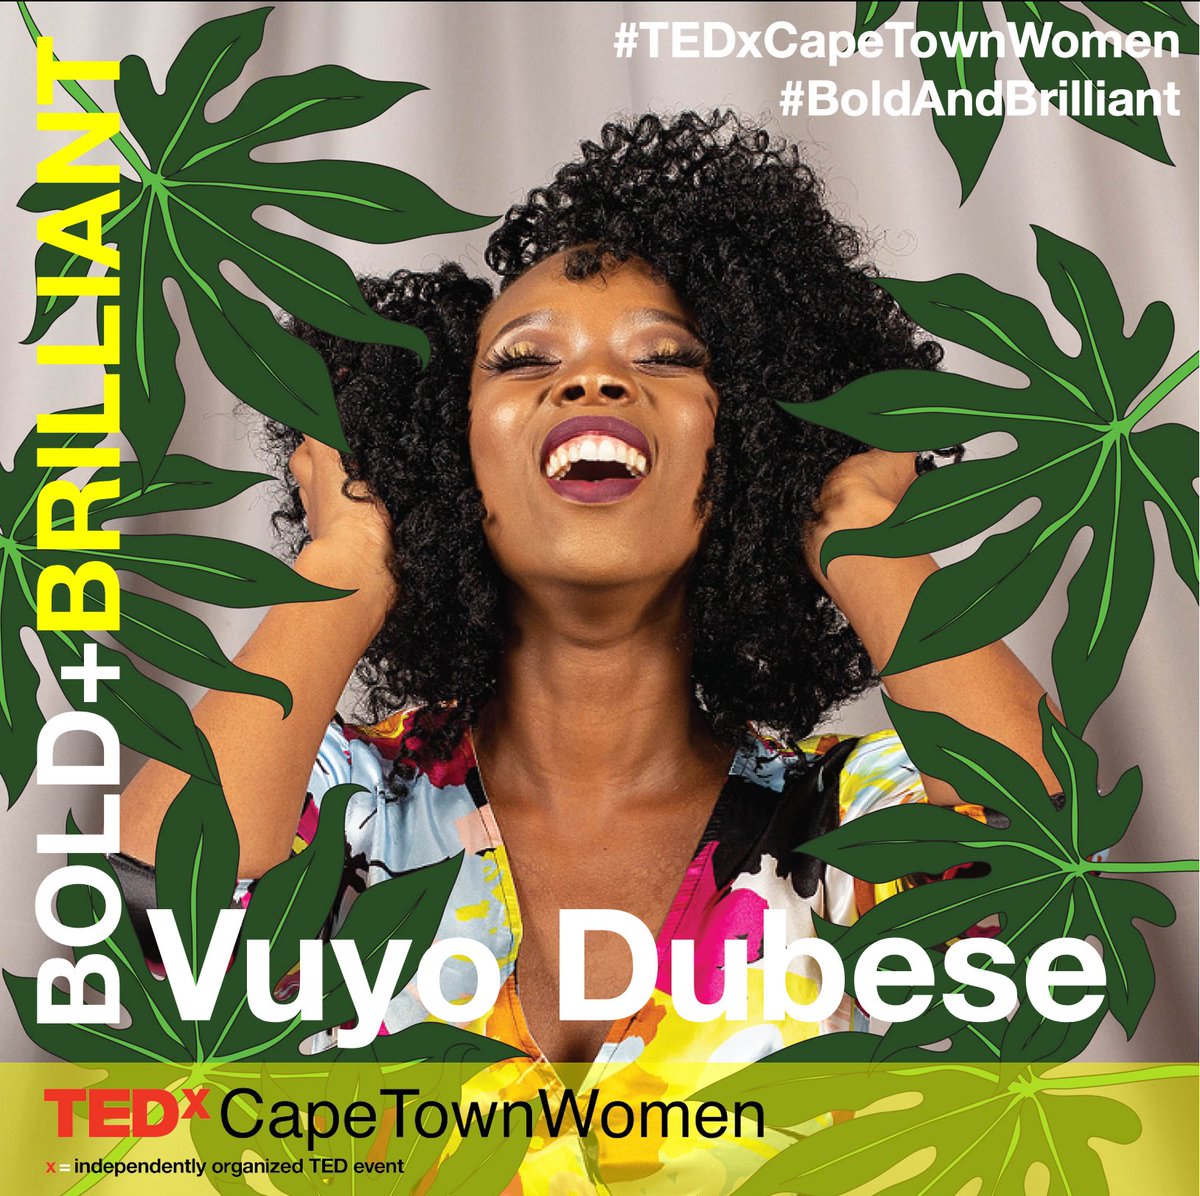 Thrilled to be hosting this coming weekend's sold out #TEDxCapeTownWomen and the Bolf and Brilliant speakers who'll be engaging on the @TEDxCTWomen stage like @BogoloKenewendo who'll be spreading ideas and experiences that effect tangible social change!